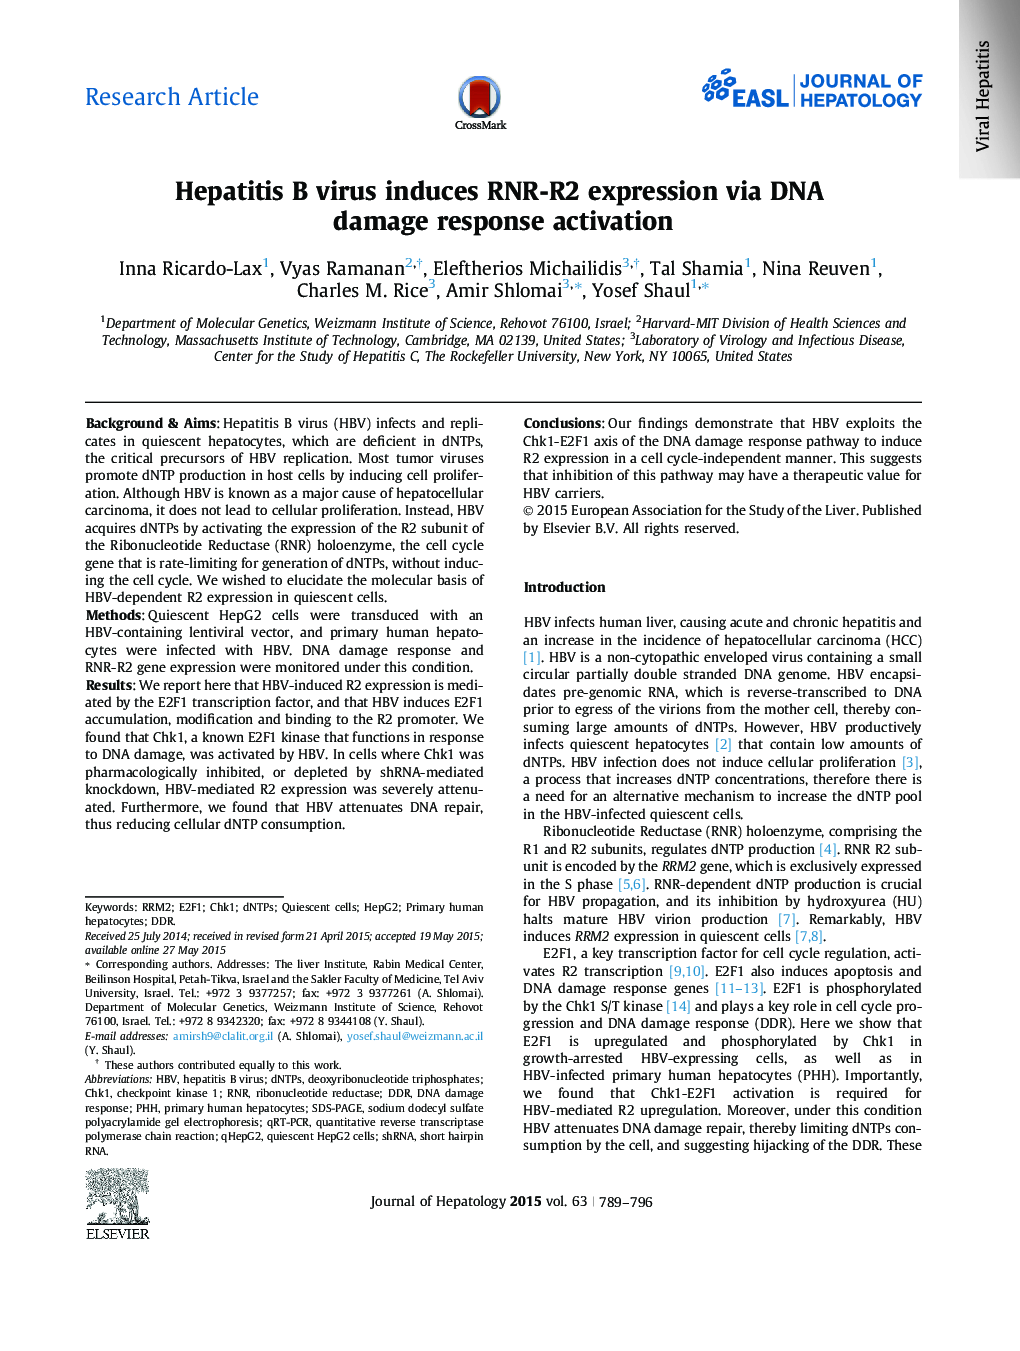 Research ArticleHepatitis B virus induces RNR-R2 expression via DNA damage response activation